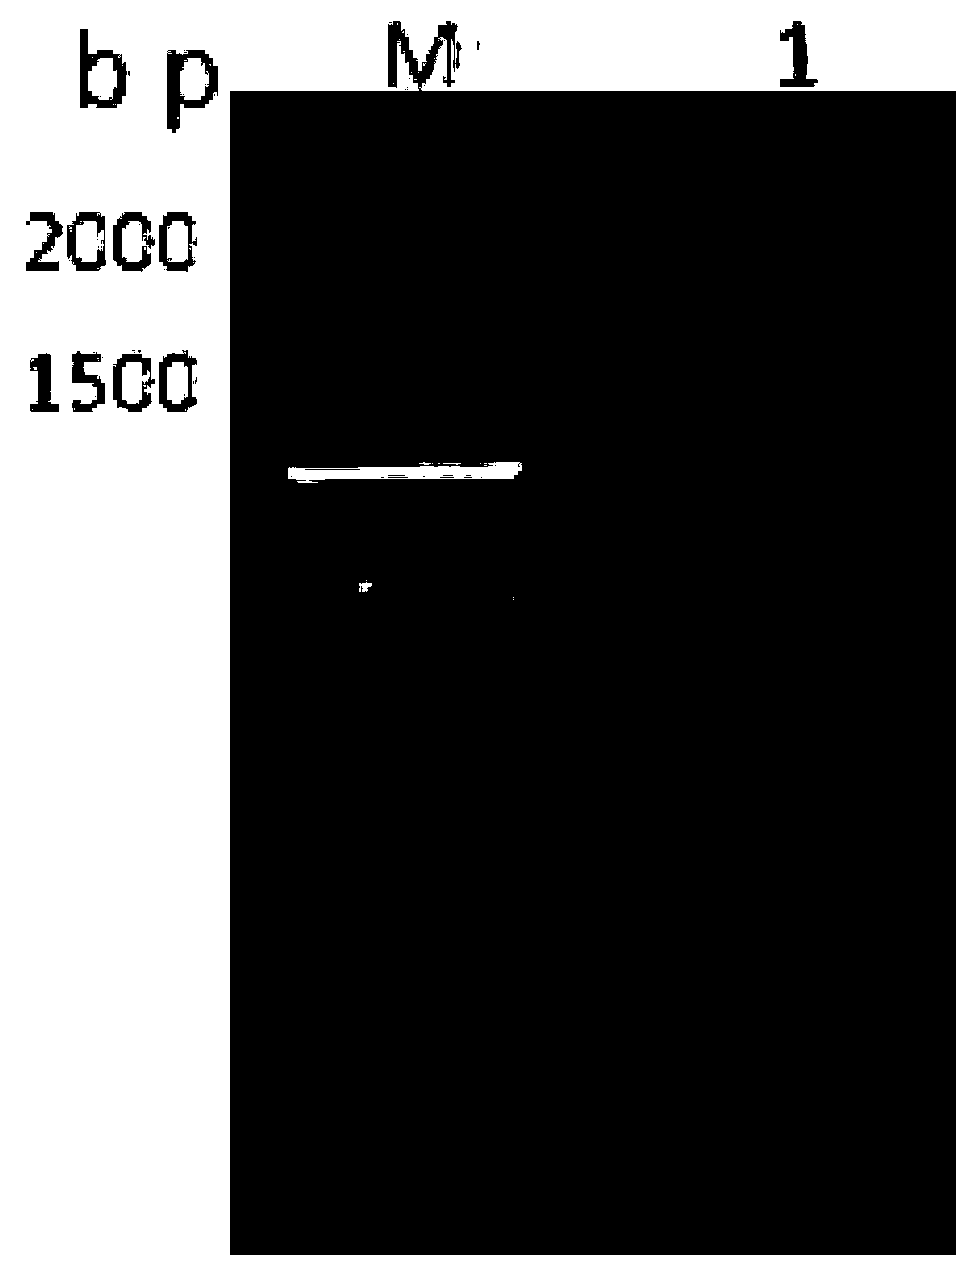 Monoclonal antibody for anti-toxoplasma gondii rhoptry protein4(ROP4) and preparation method and application of monoclonal antibody